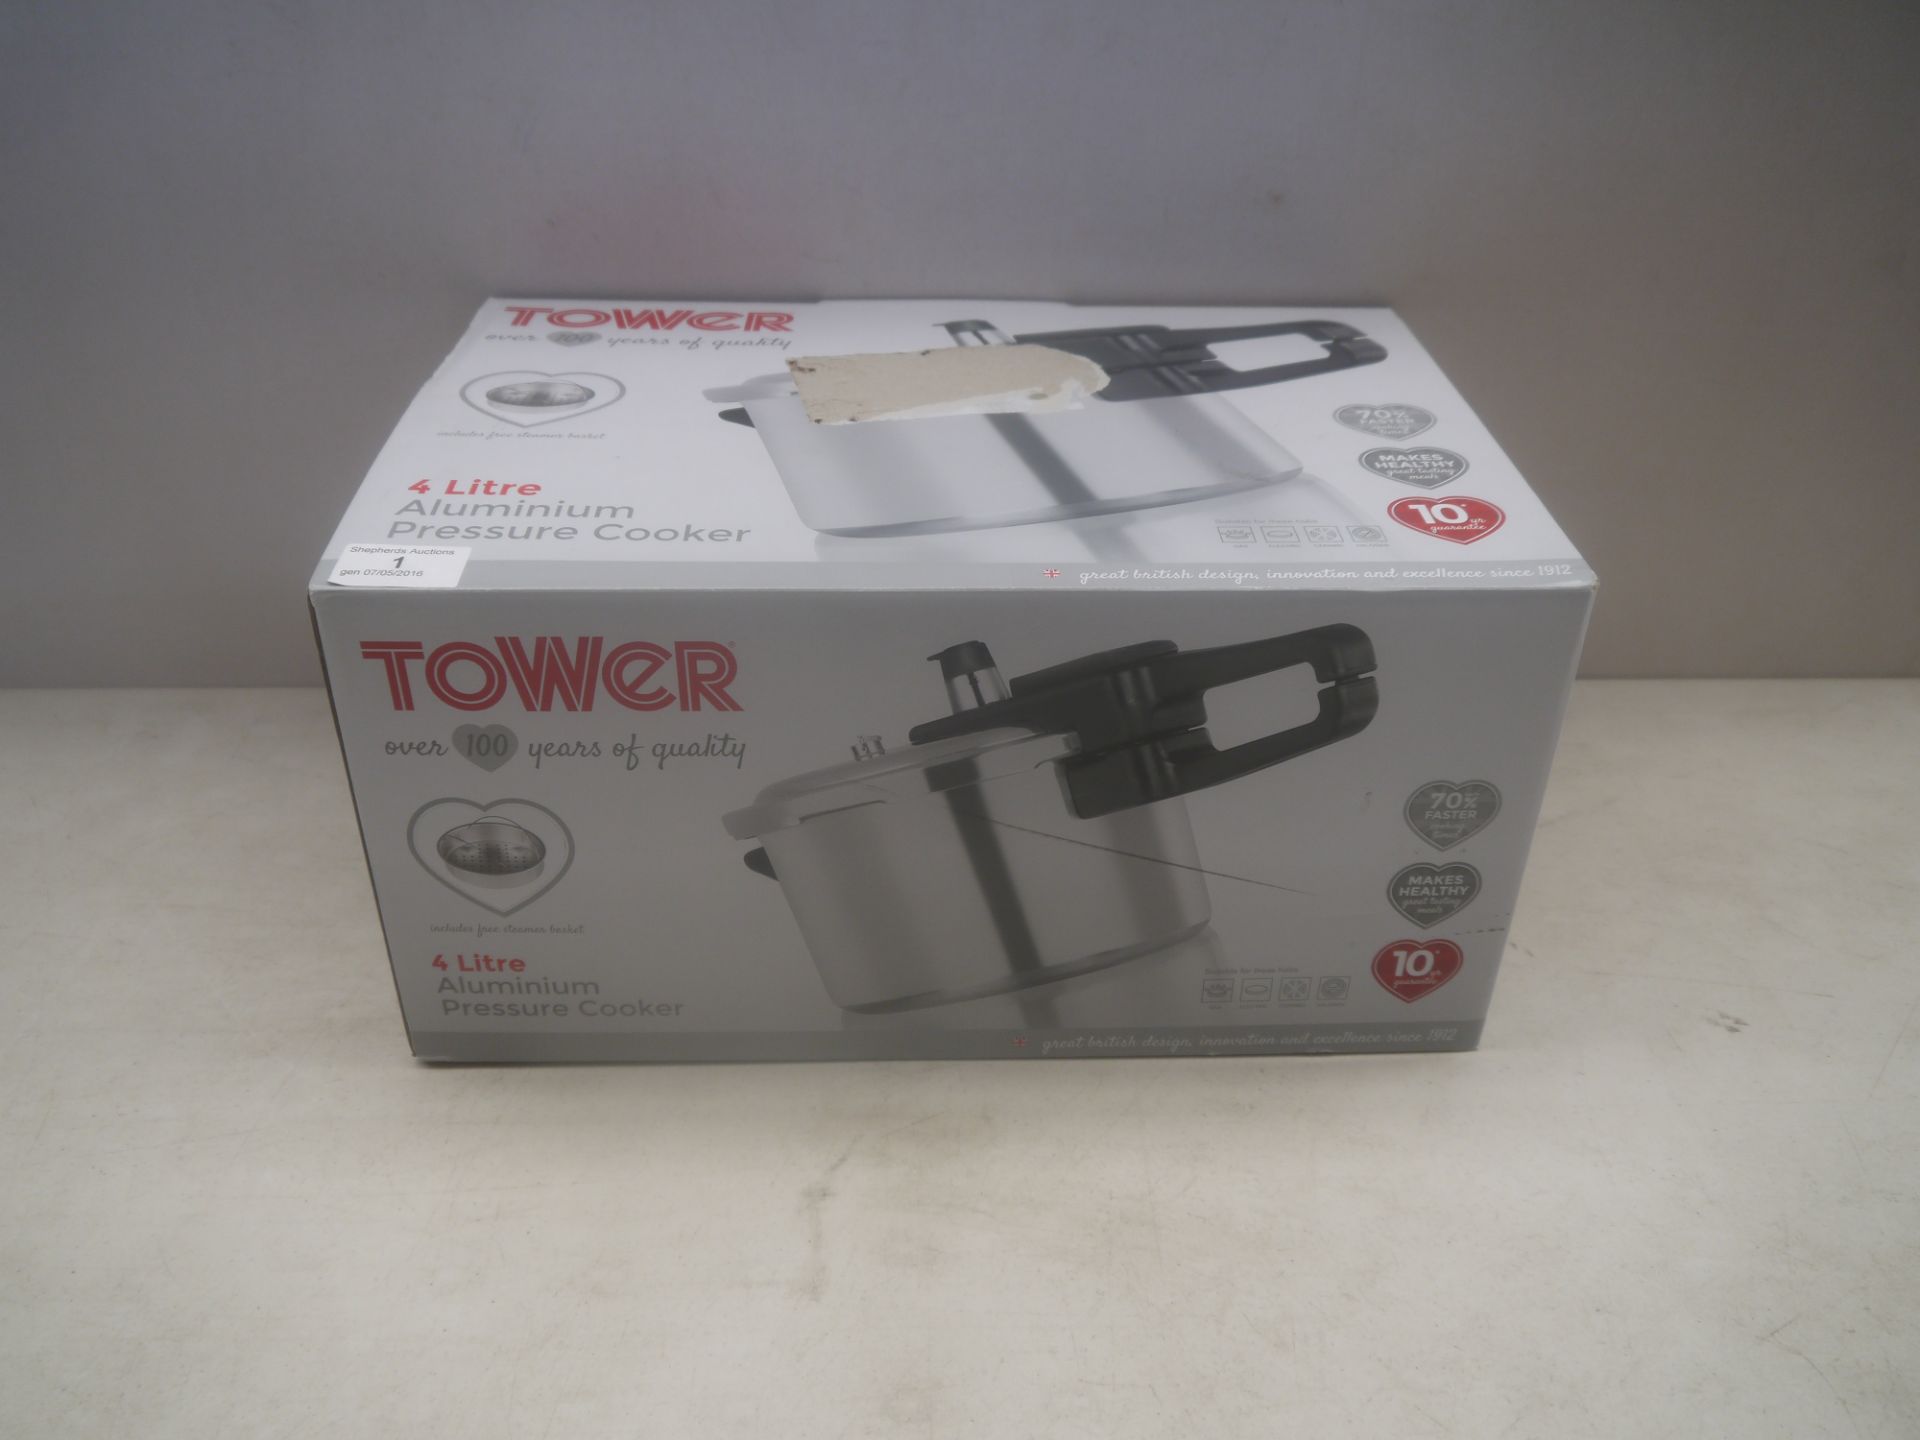 Tower 4L Aluminium pressure cooker, unchecked and boxed.